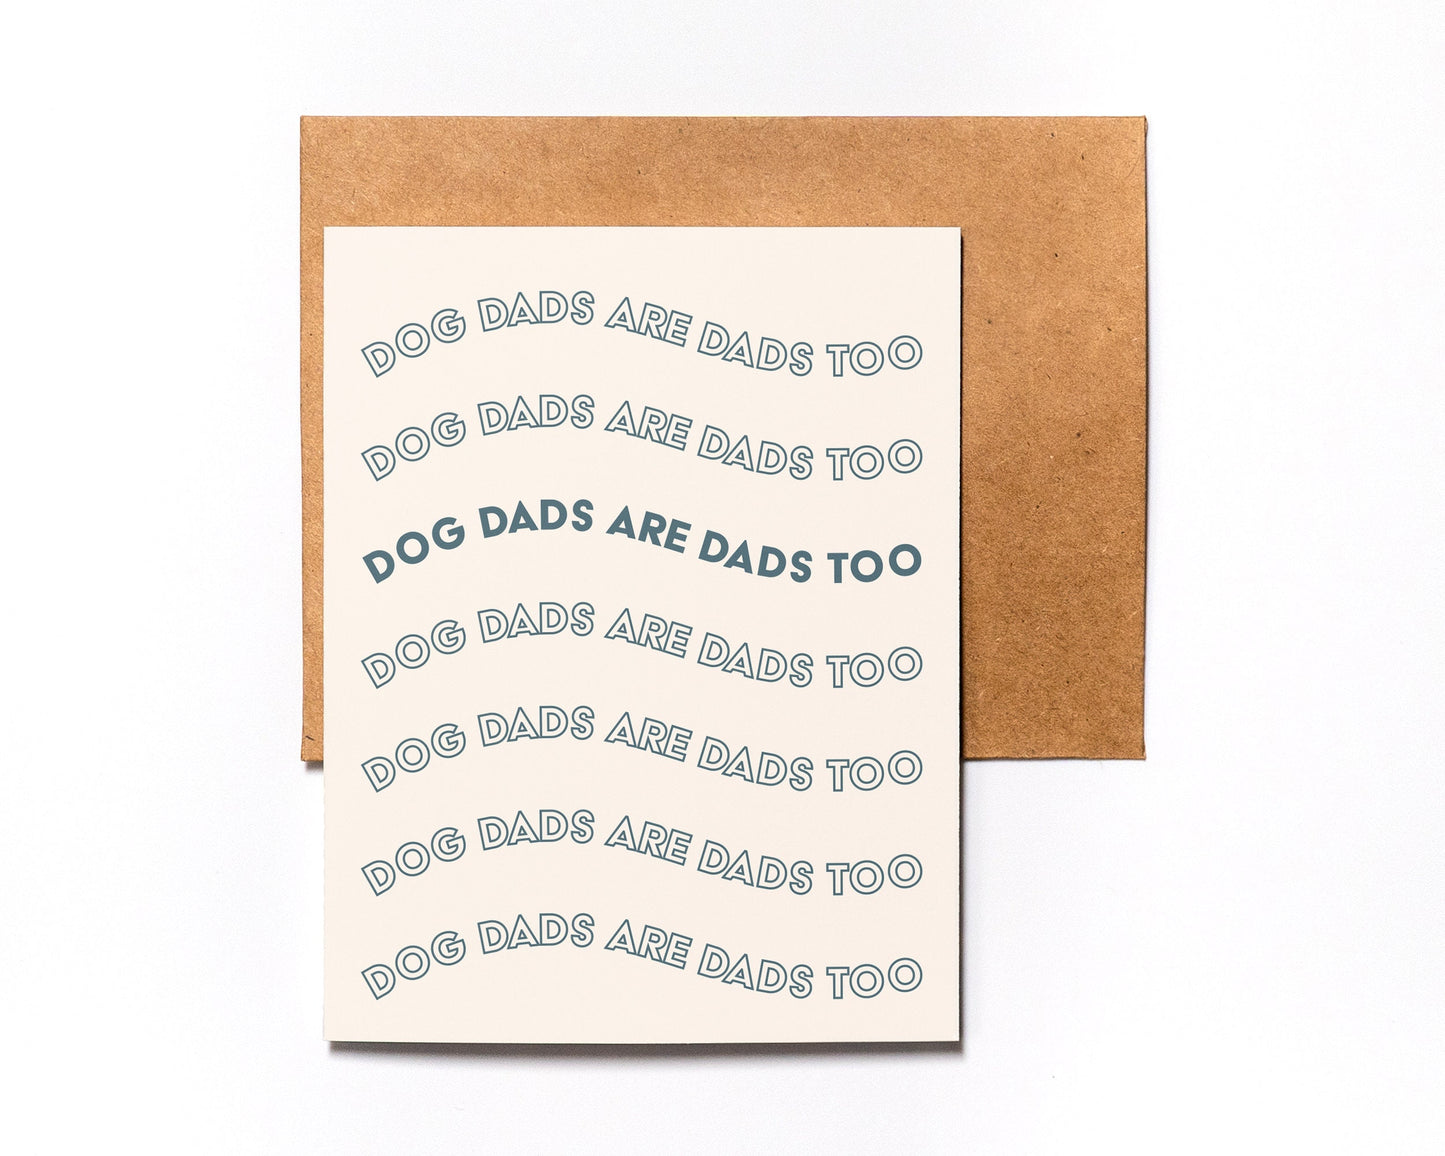 Father's Day Card For Dog Dad | Dog Dads are Dads Too - Pet Parent - Fathers Day Greeting Card - Folded - Father's Day Gift Idea - Fur Baby